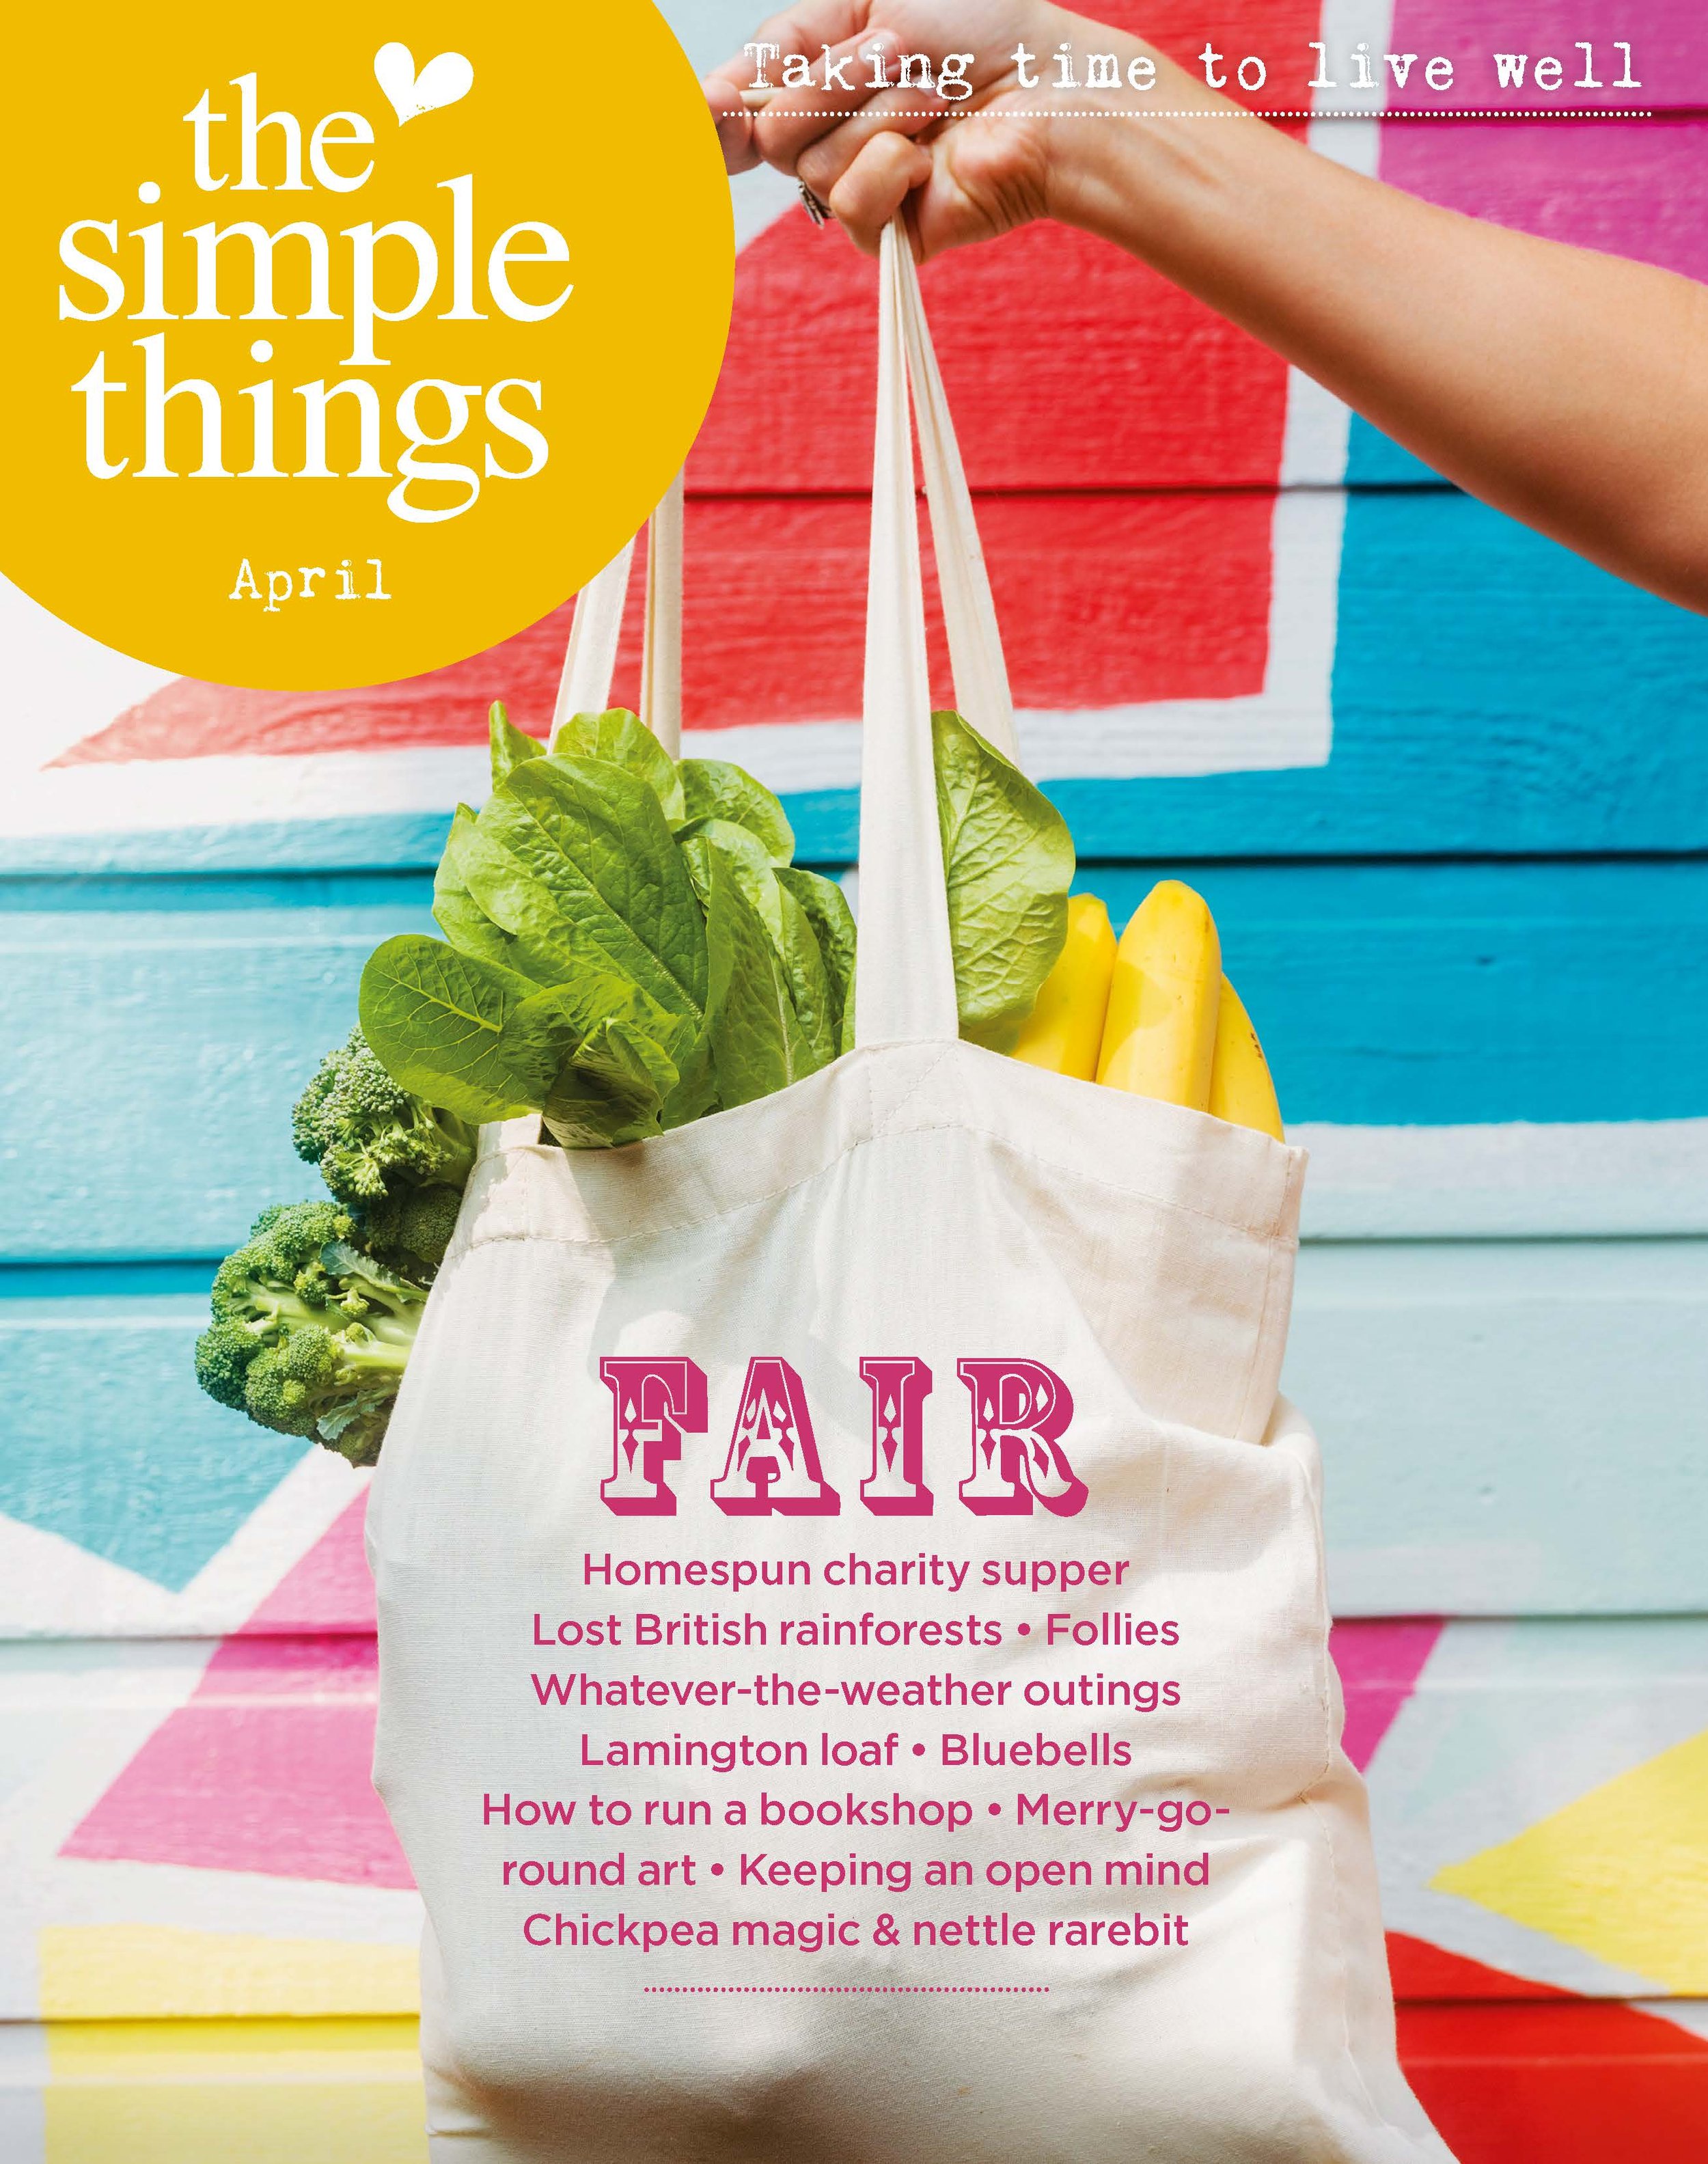  APRIL ISSUE   Buy ,  download  or  subscribe   See the sample of our latest issue  here   Buy a copy of Flourish 2, our  wellbeing bookazine , or our  Everyday Anthology .  Listen to our new podcast -  Small Ways to Live Well  